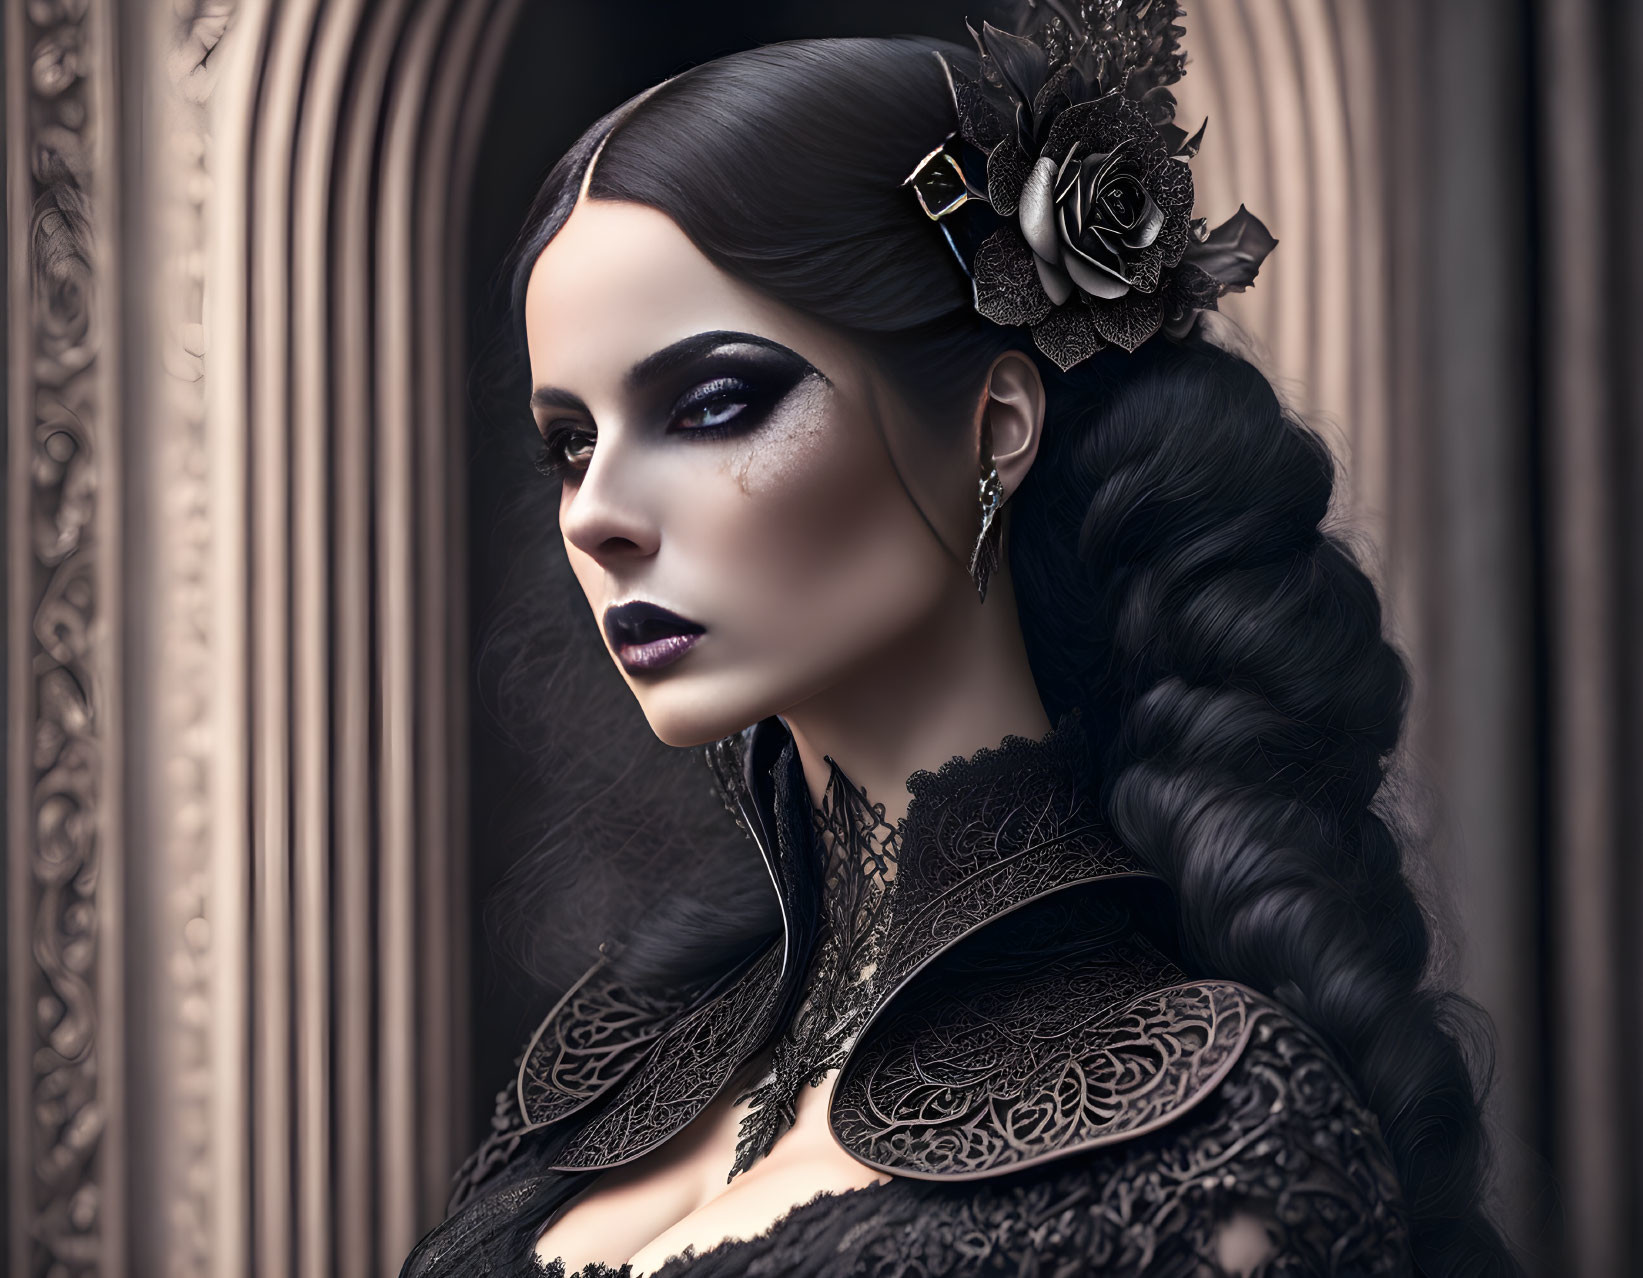 Dark Makeup and Braided Hair on Woman in Black Lace Clothing with Floral Hair Accessory Displays Gothic A